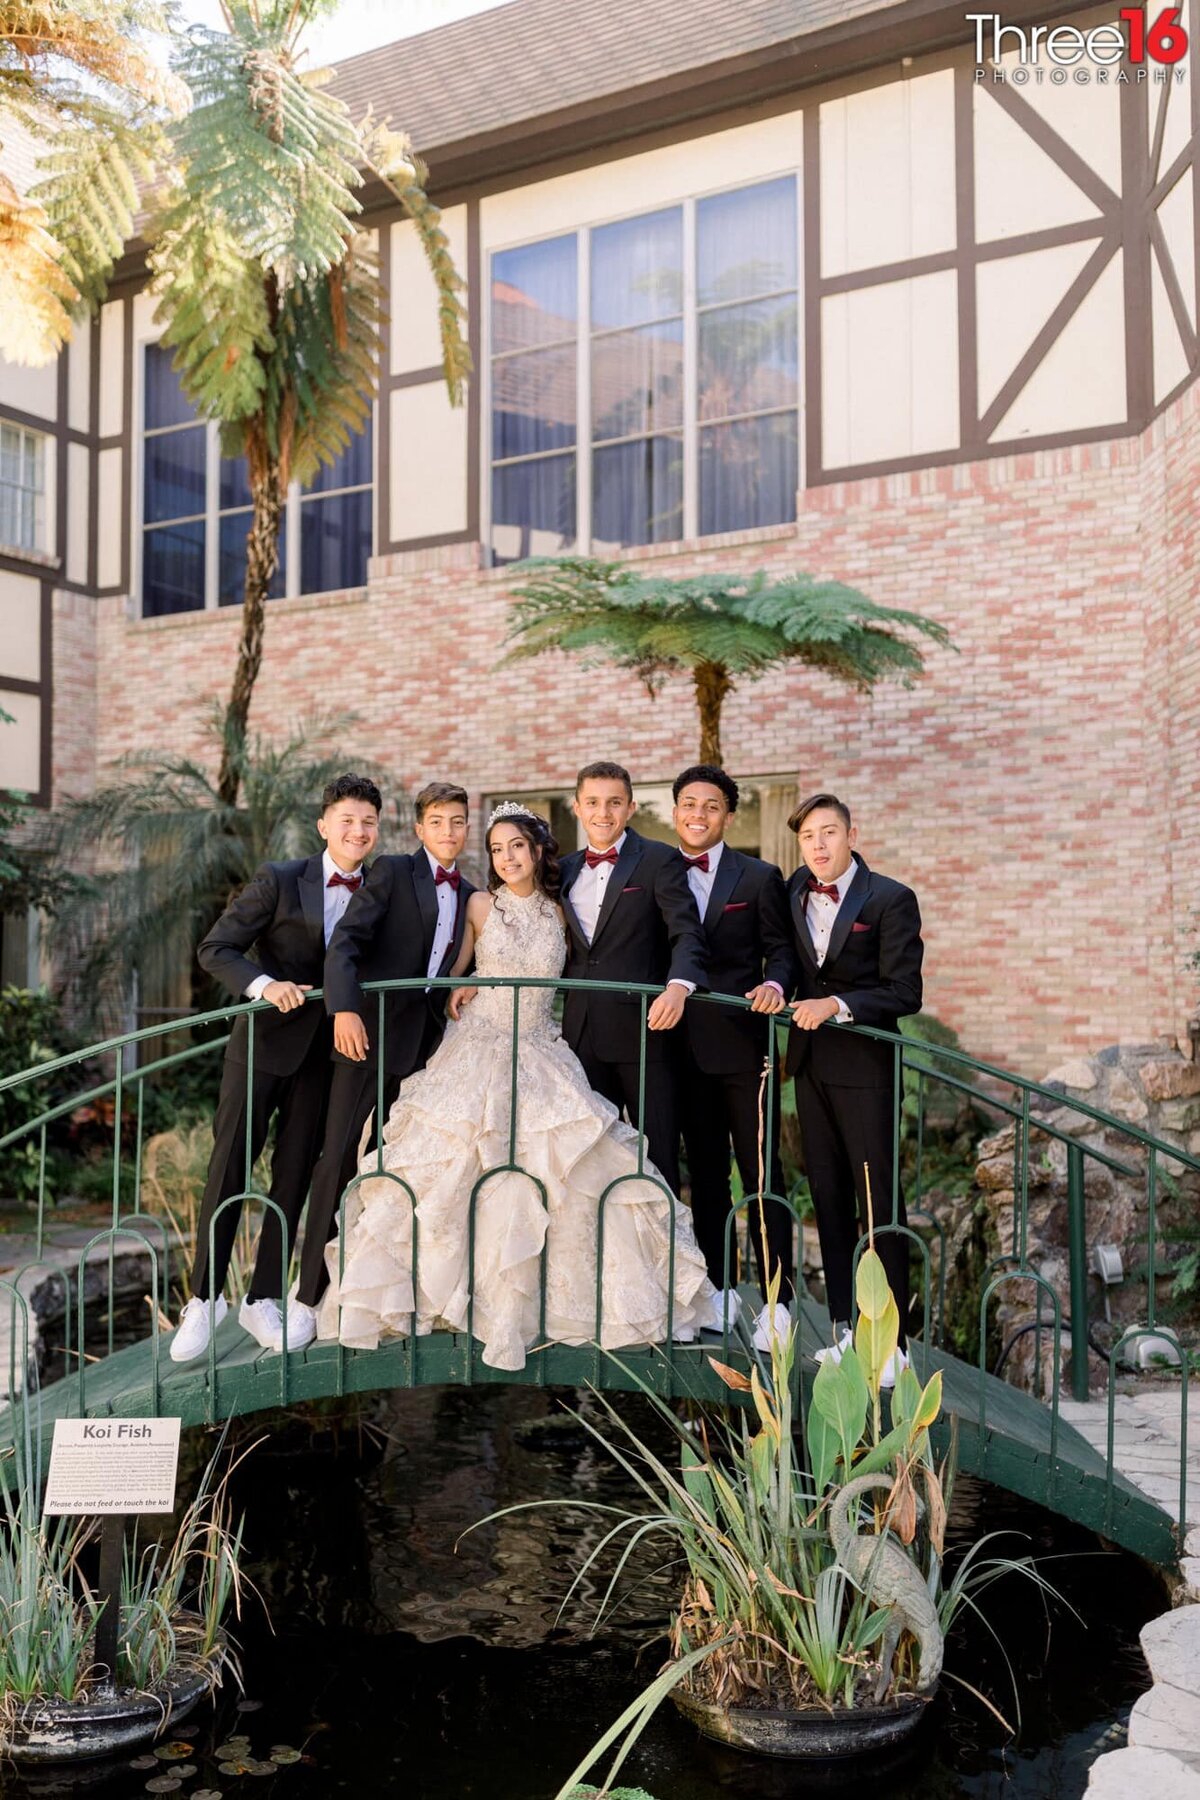 Young men dressed in black tuxedos pose with the quinceanera girl on a small bridge